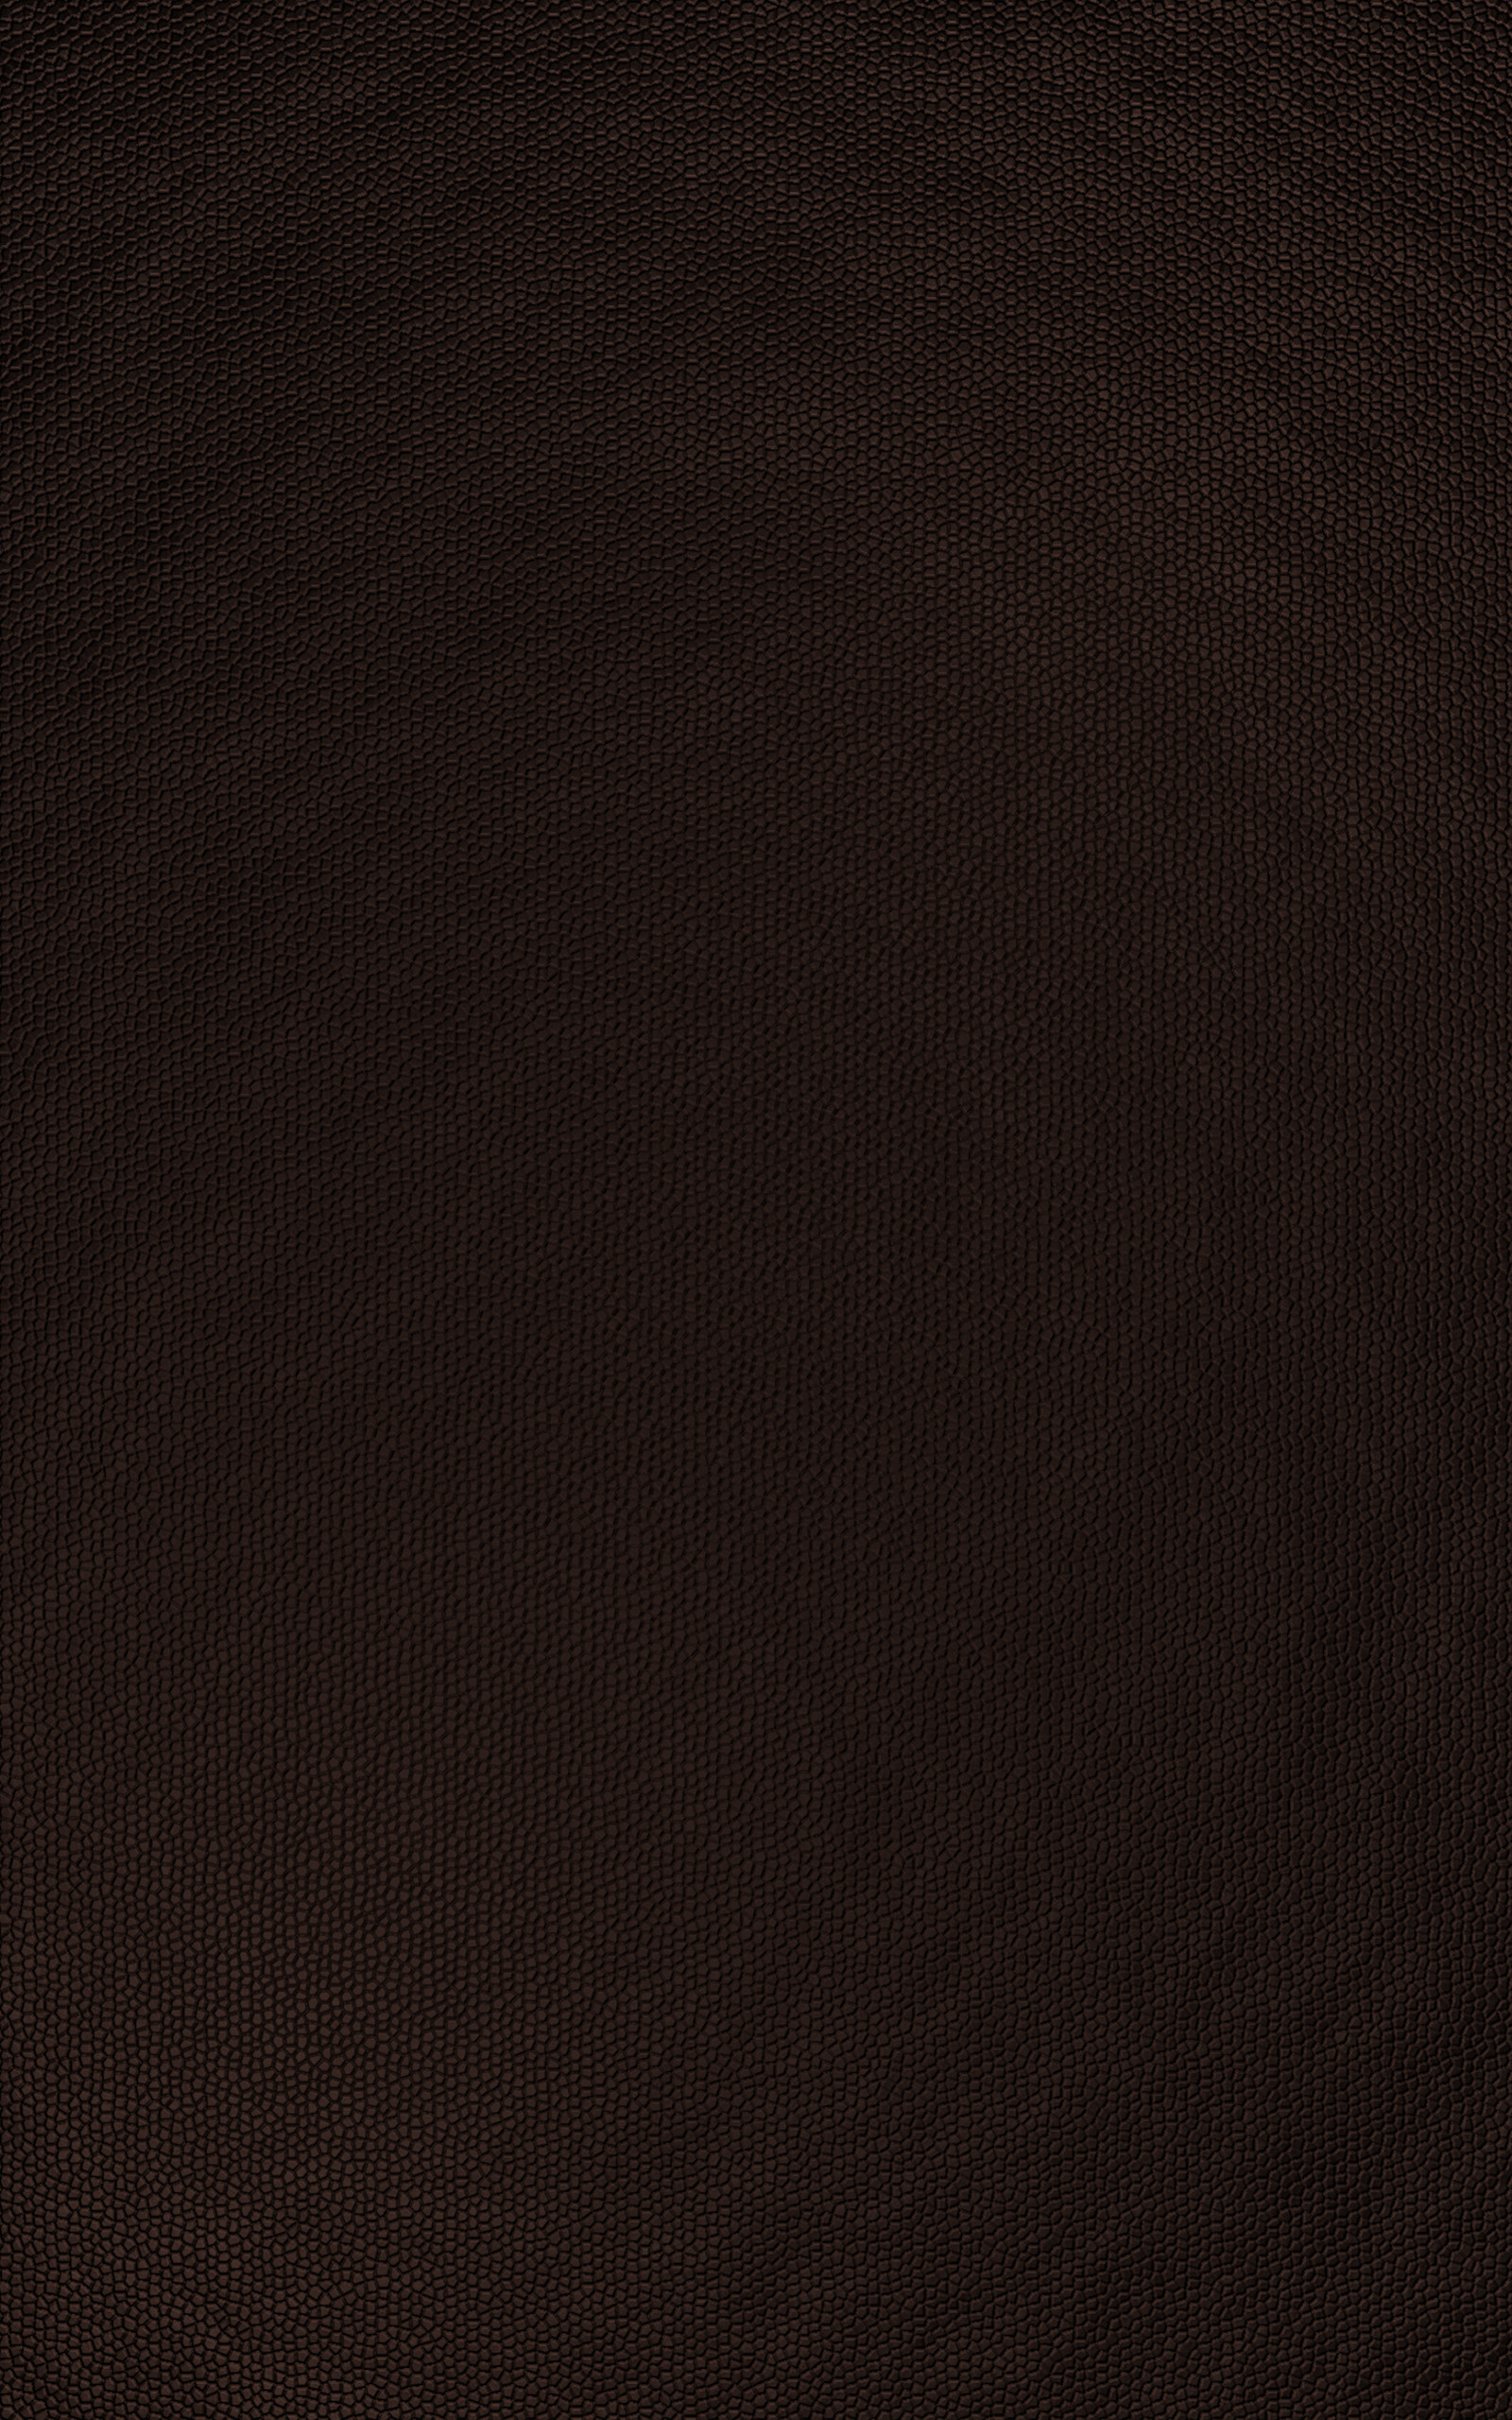 Brown leather Wallpaper